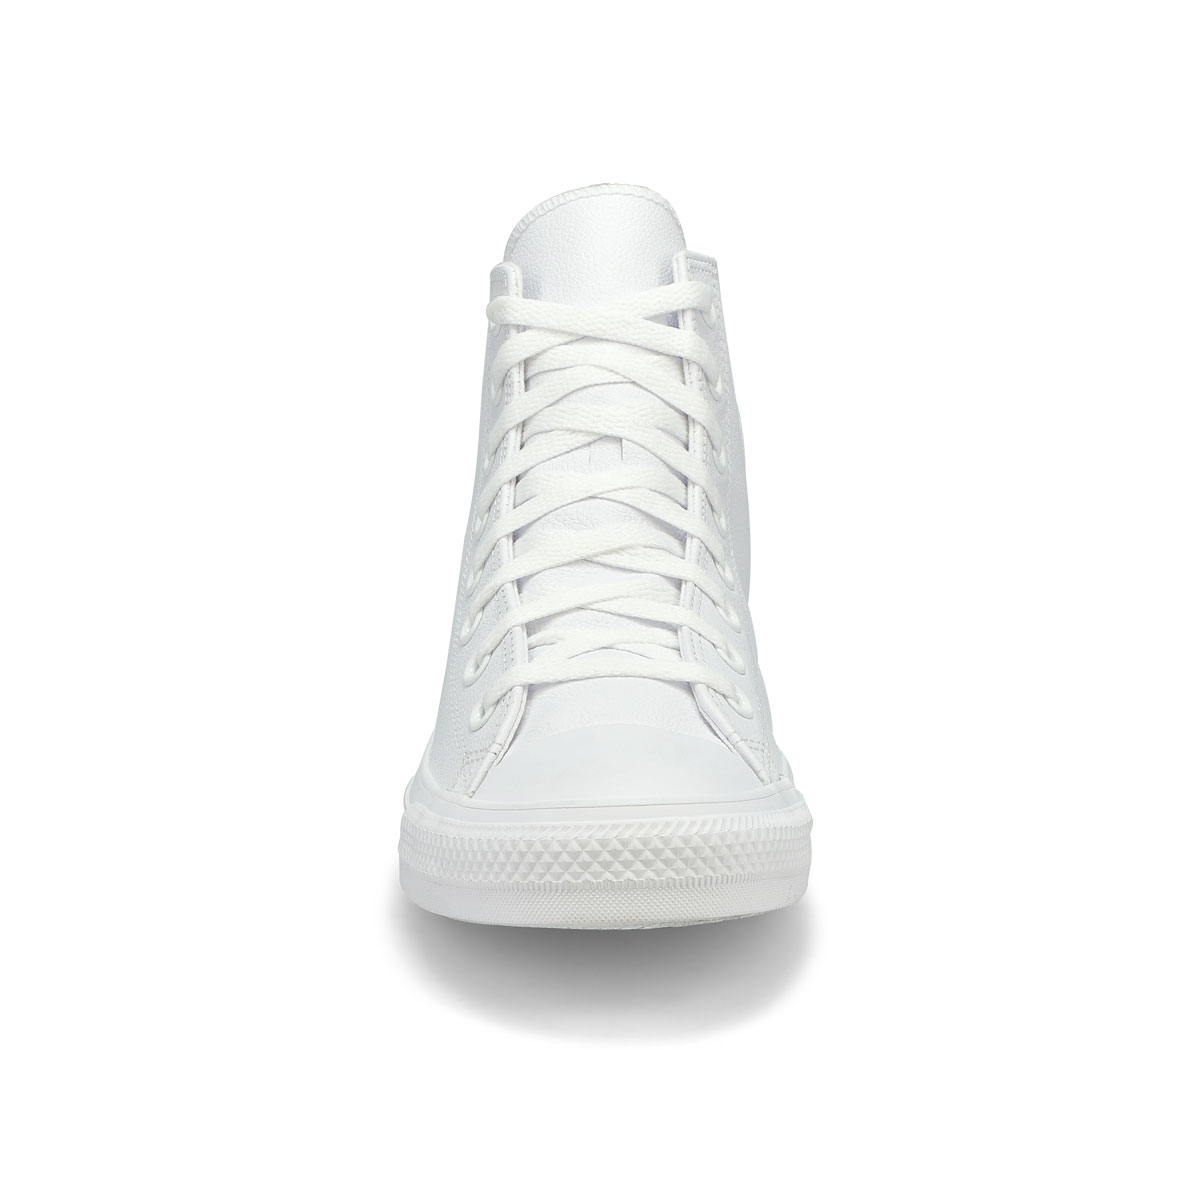 Mens Chuck Taylor All Star Leather Hi Top Sneaker - White Mono